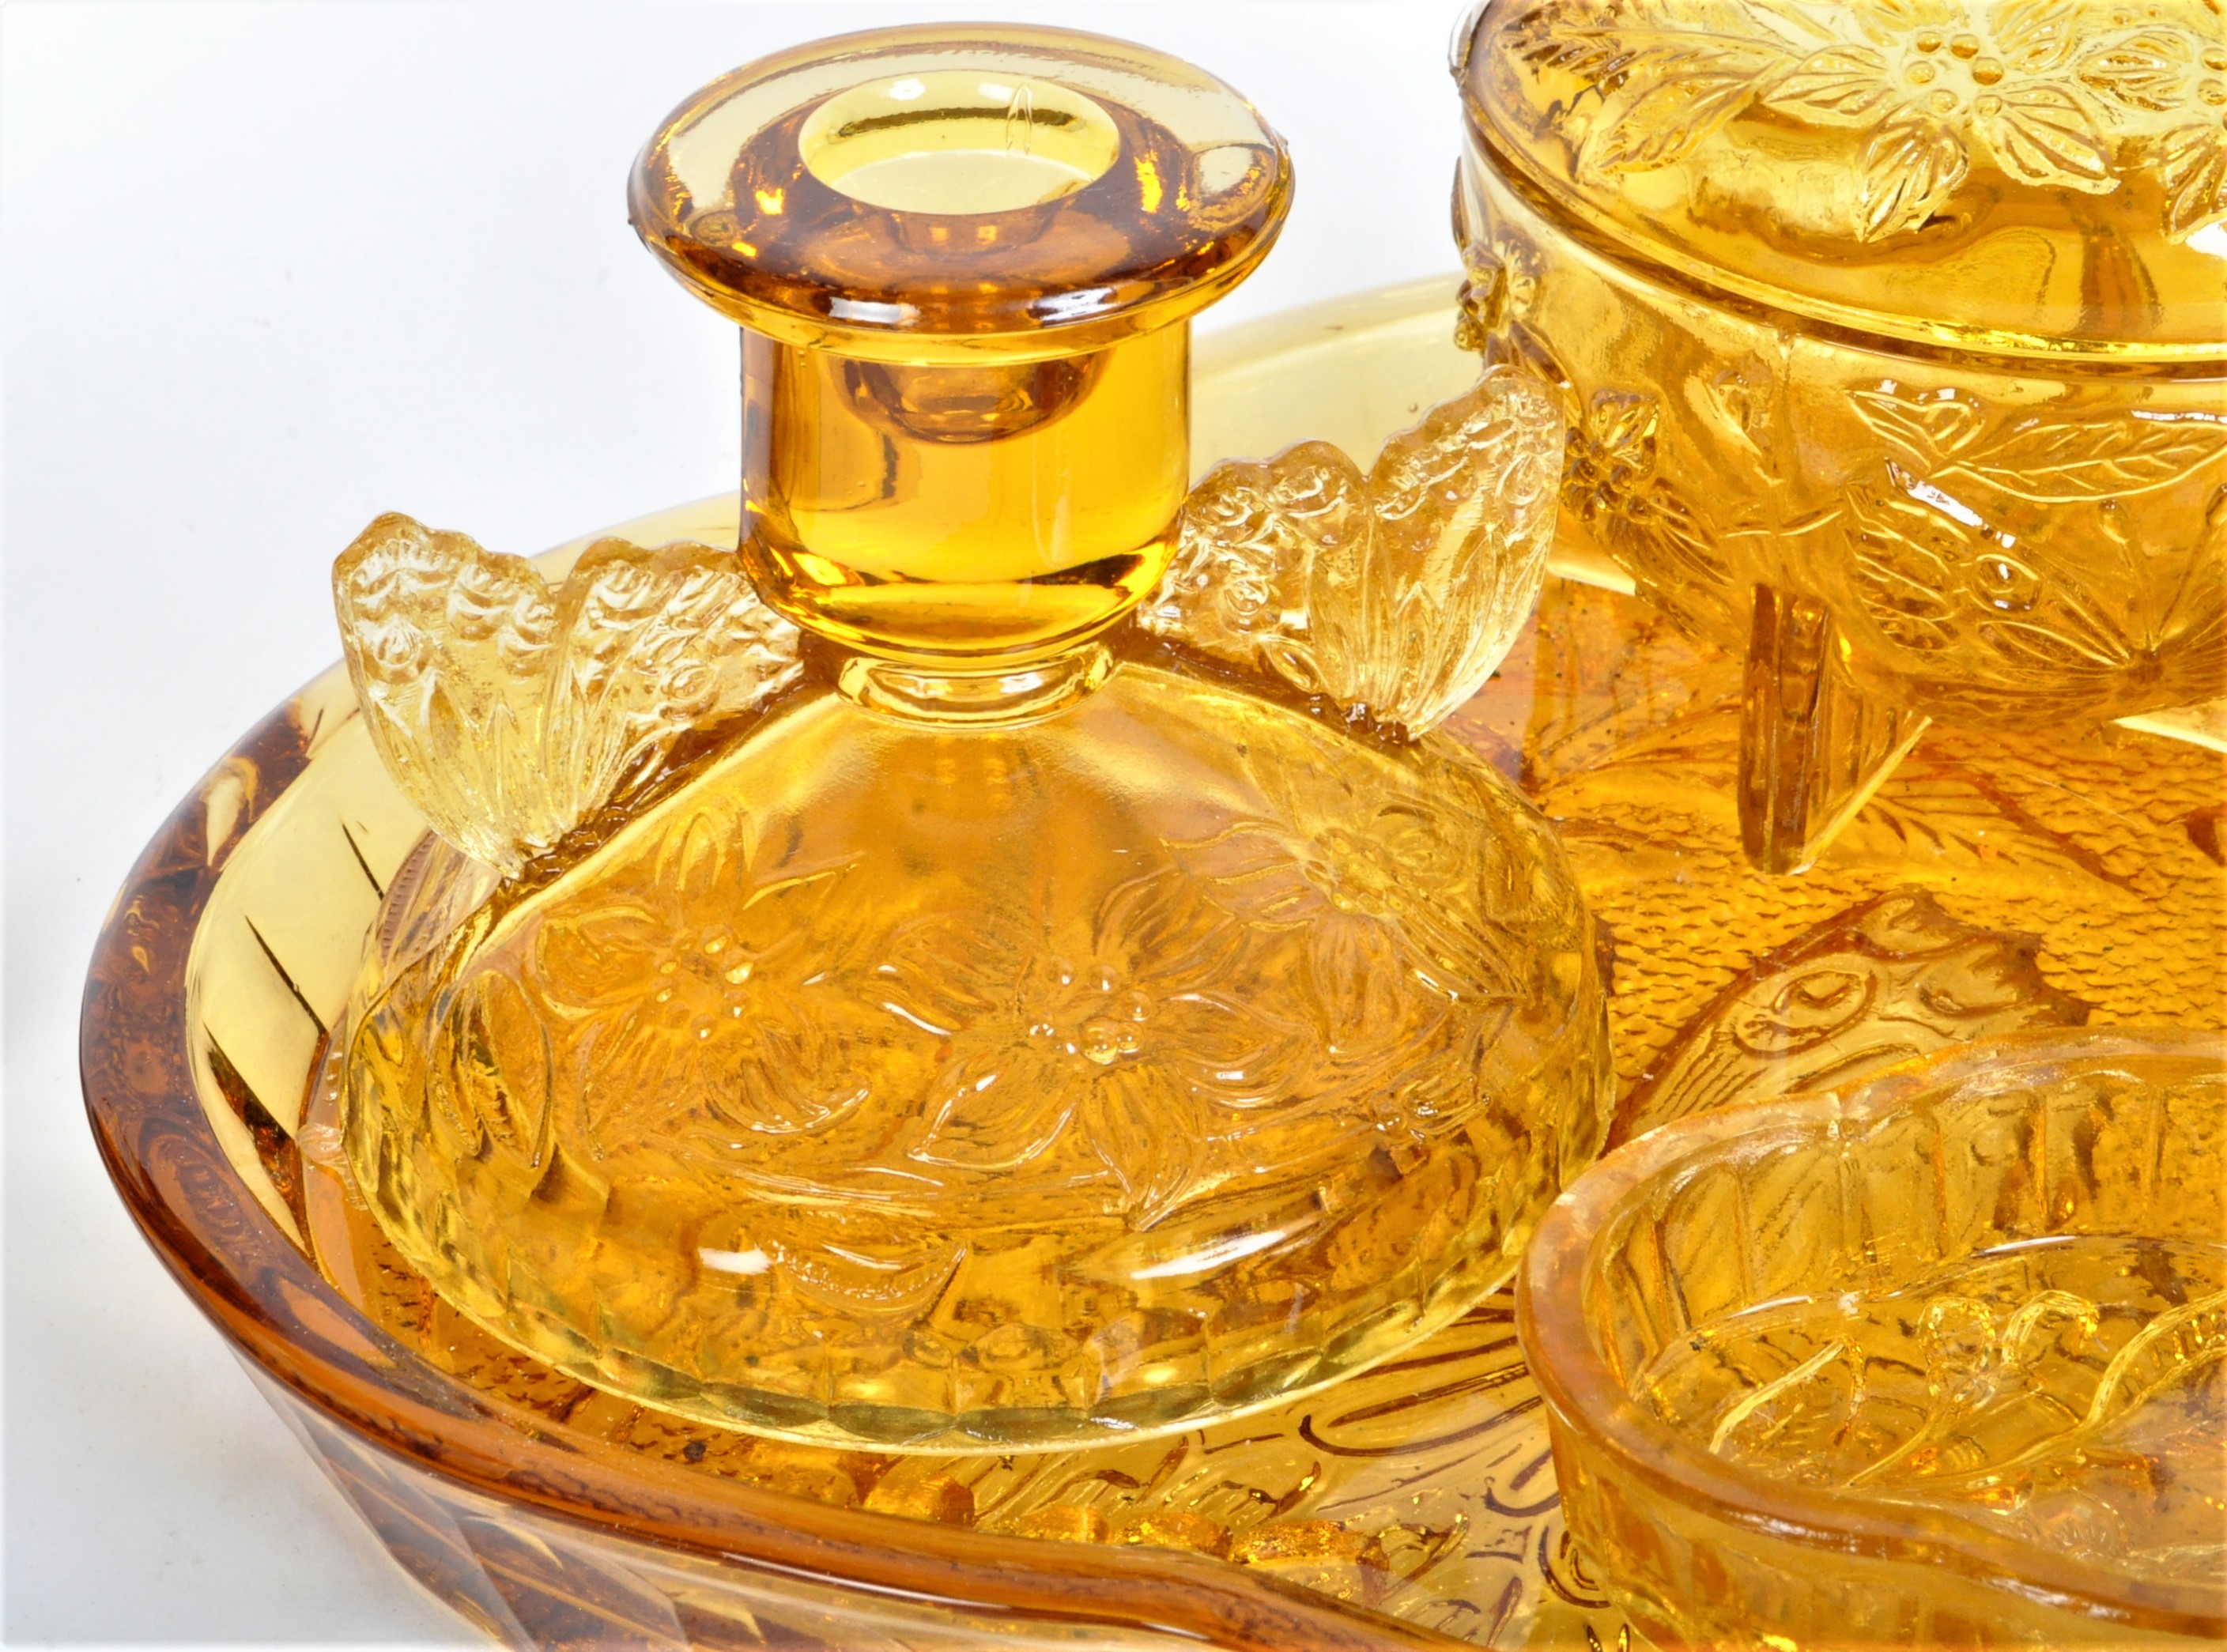 ART DECO AMBER GLASS SOWERBY BUTTERFLY VANITY SET - Image 3 of 6